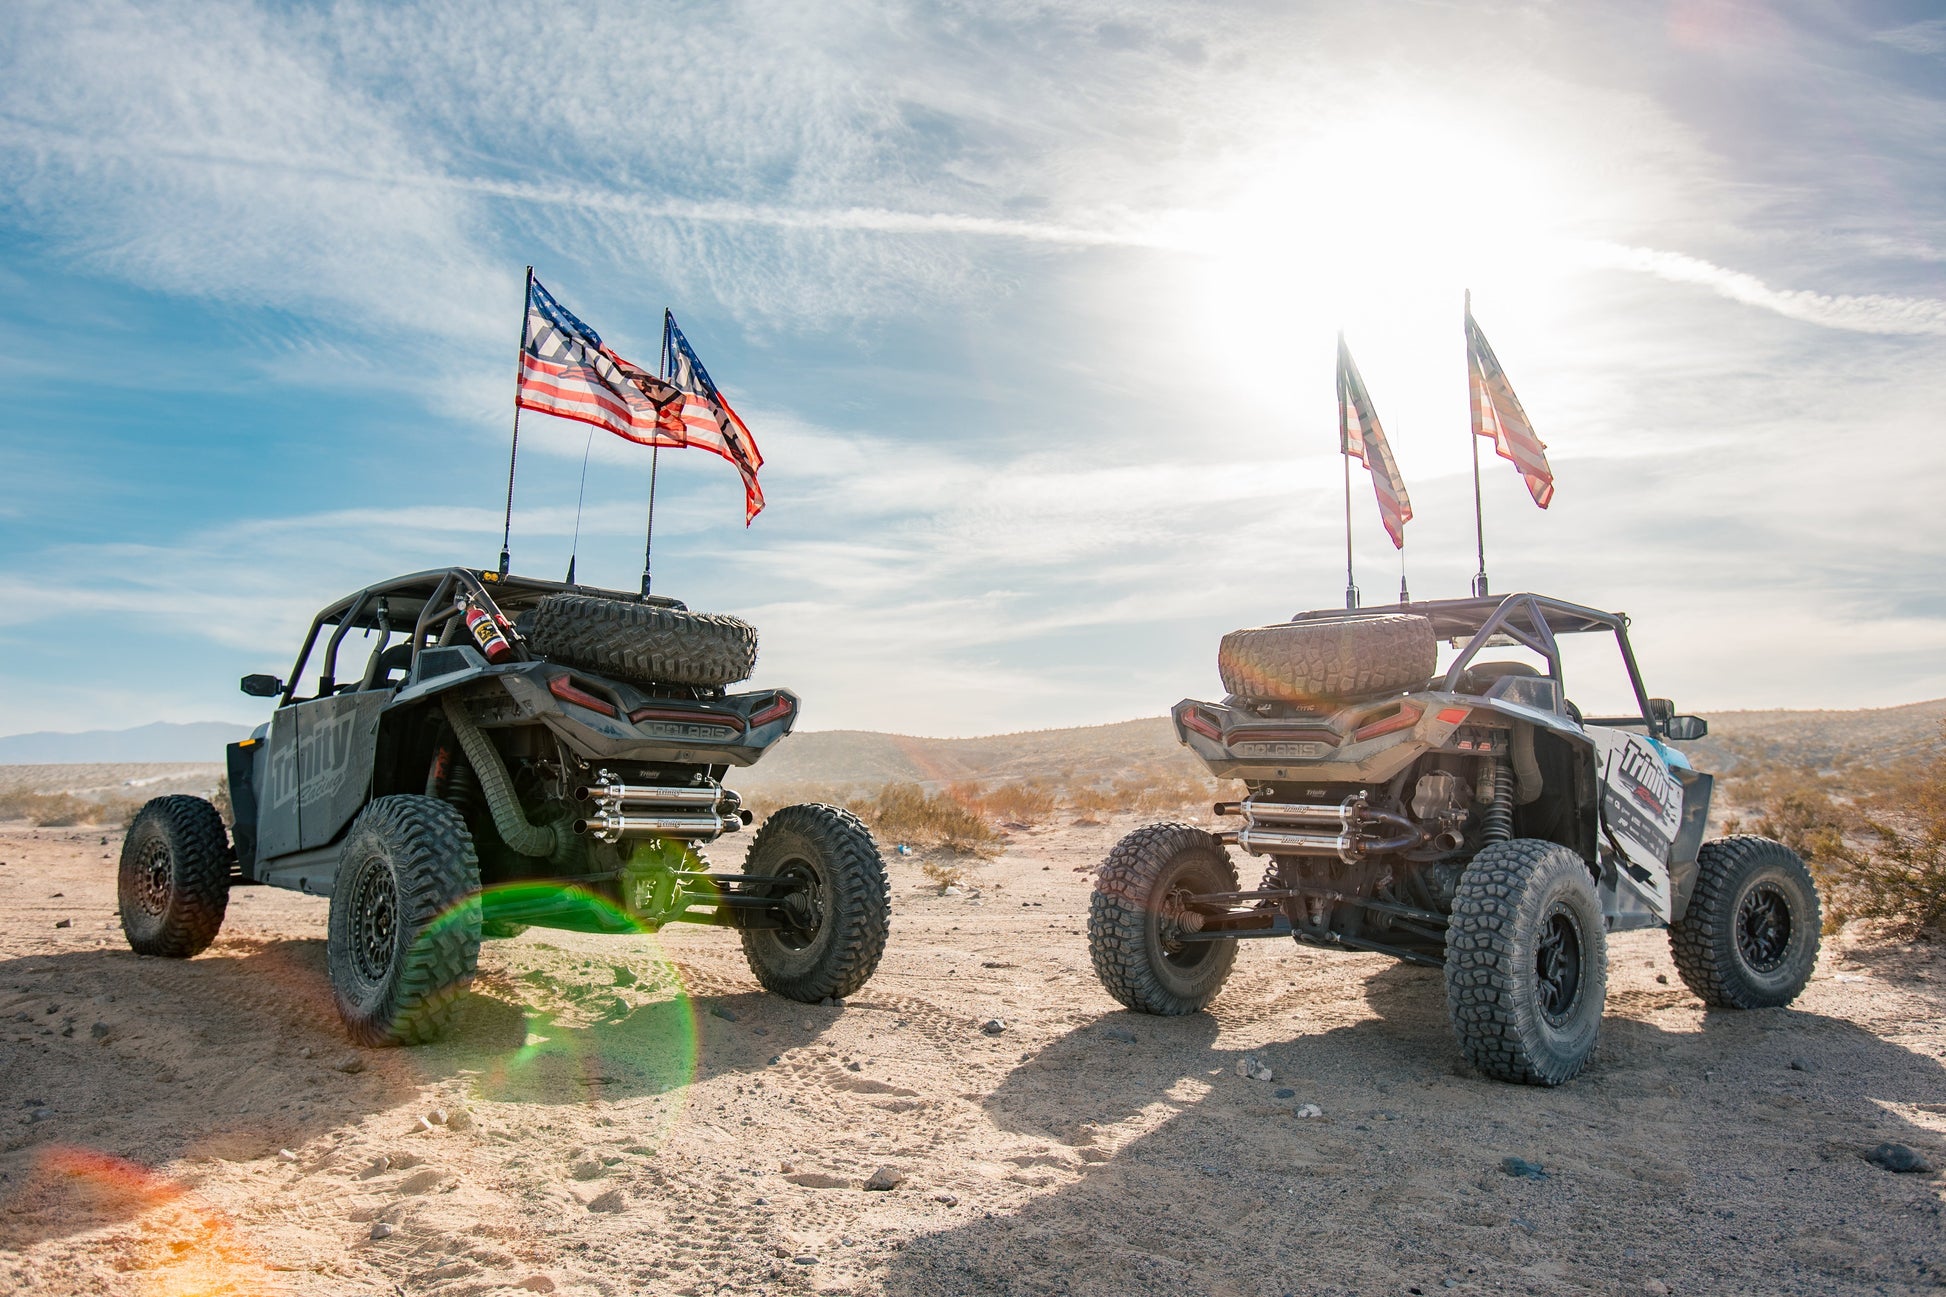 Trinity Racing Stainless Steel RZR PRO XP TURBO R FULL SYSTEM on 2 machines in desert